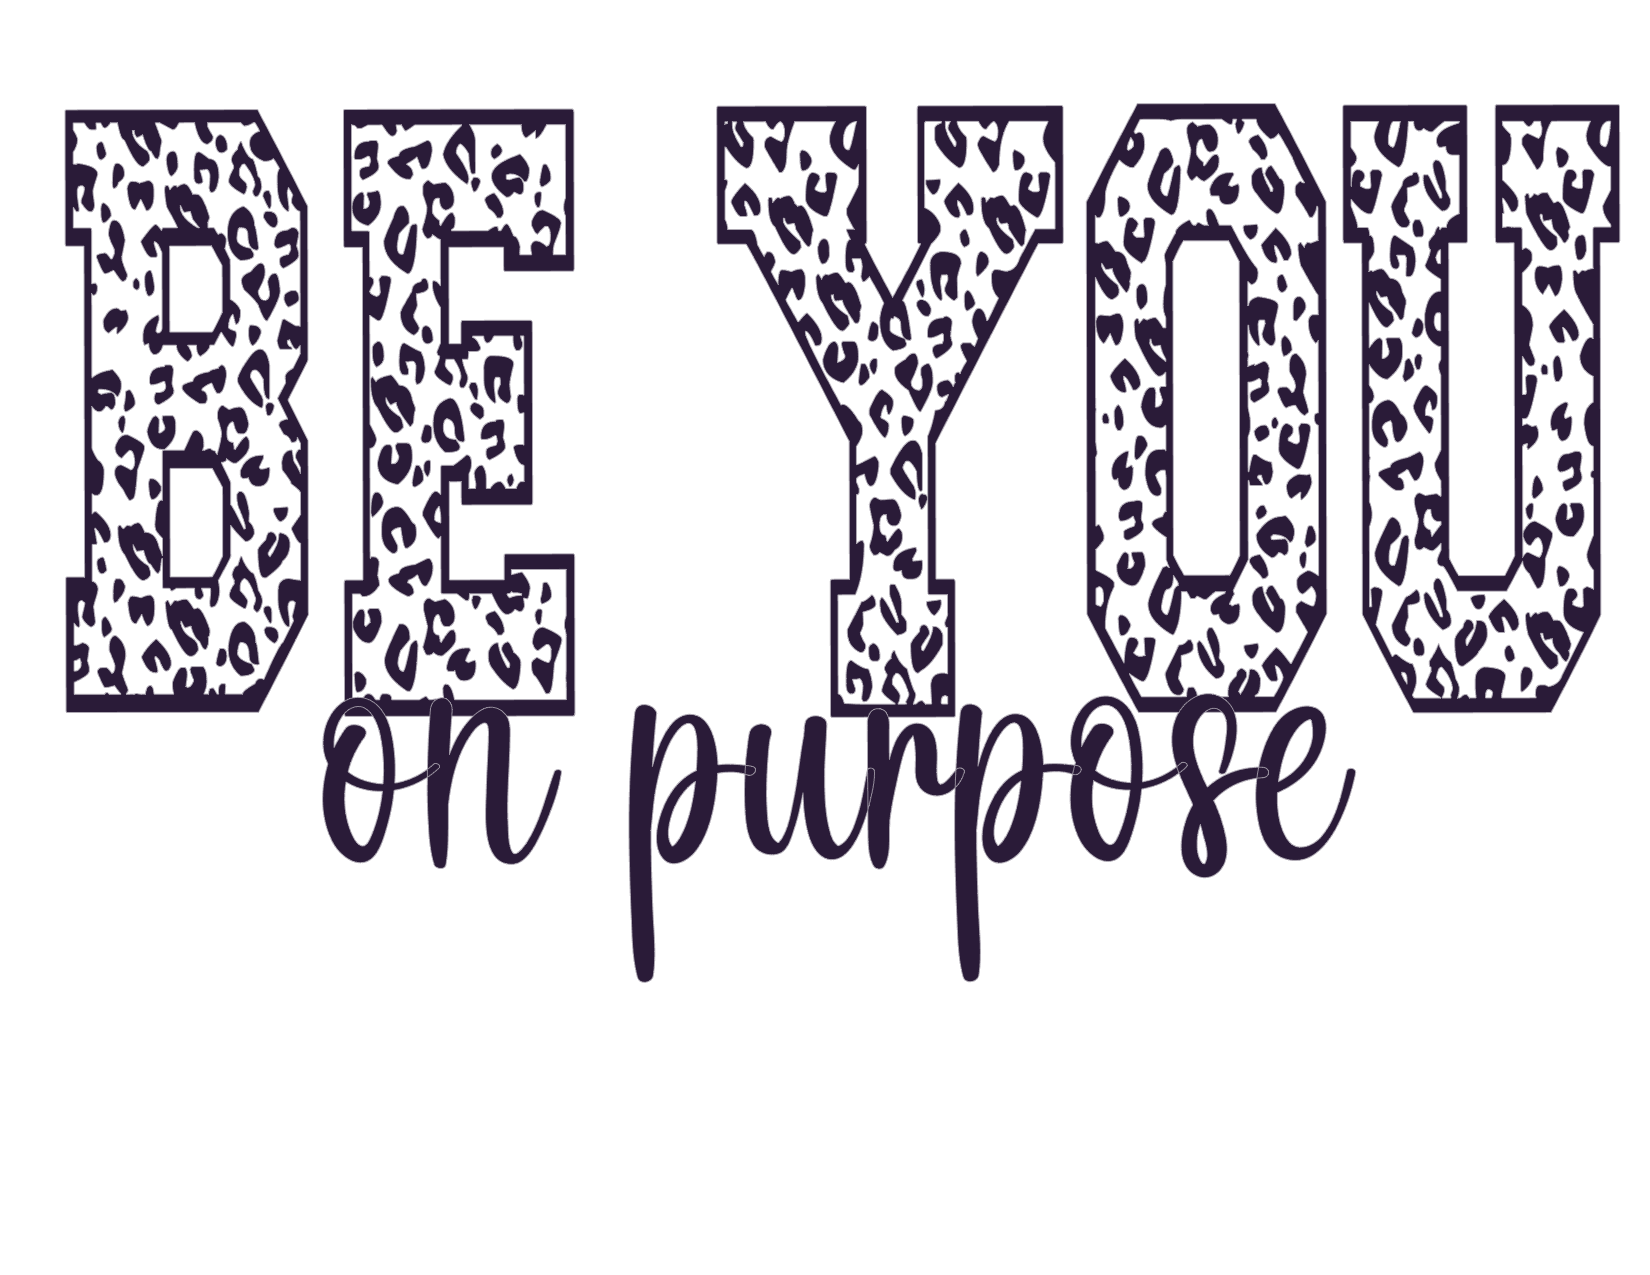 #261 Be You on Purpose (Black Leopard)